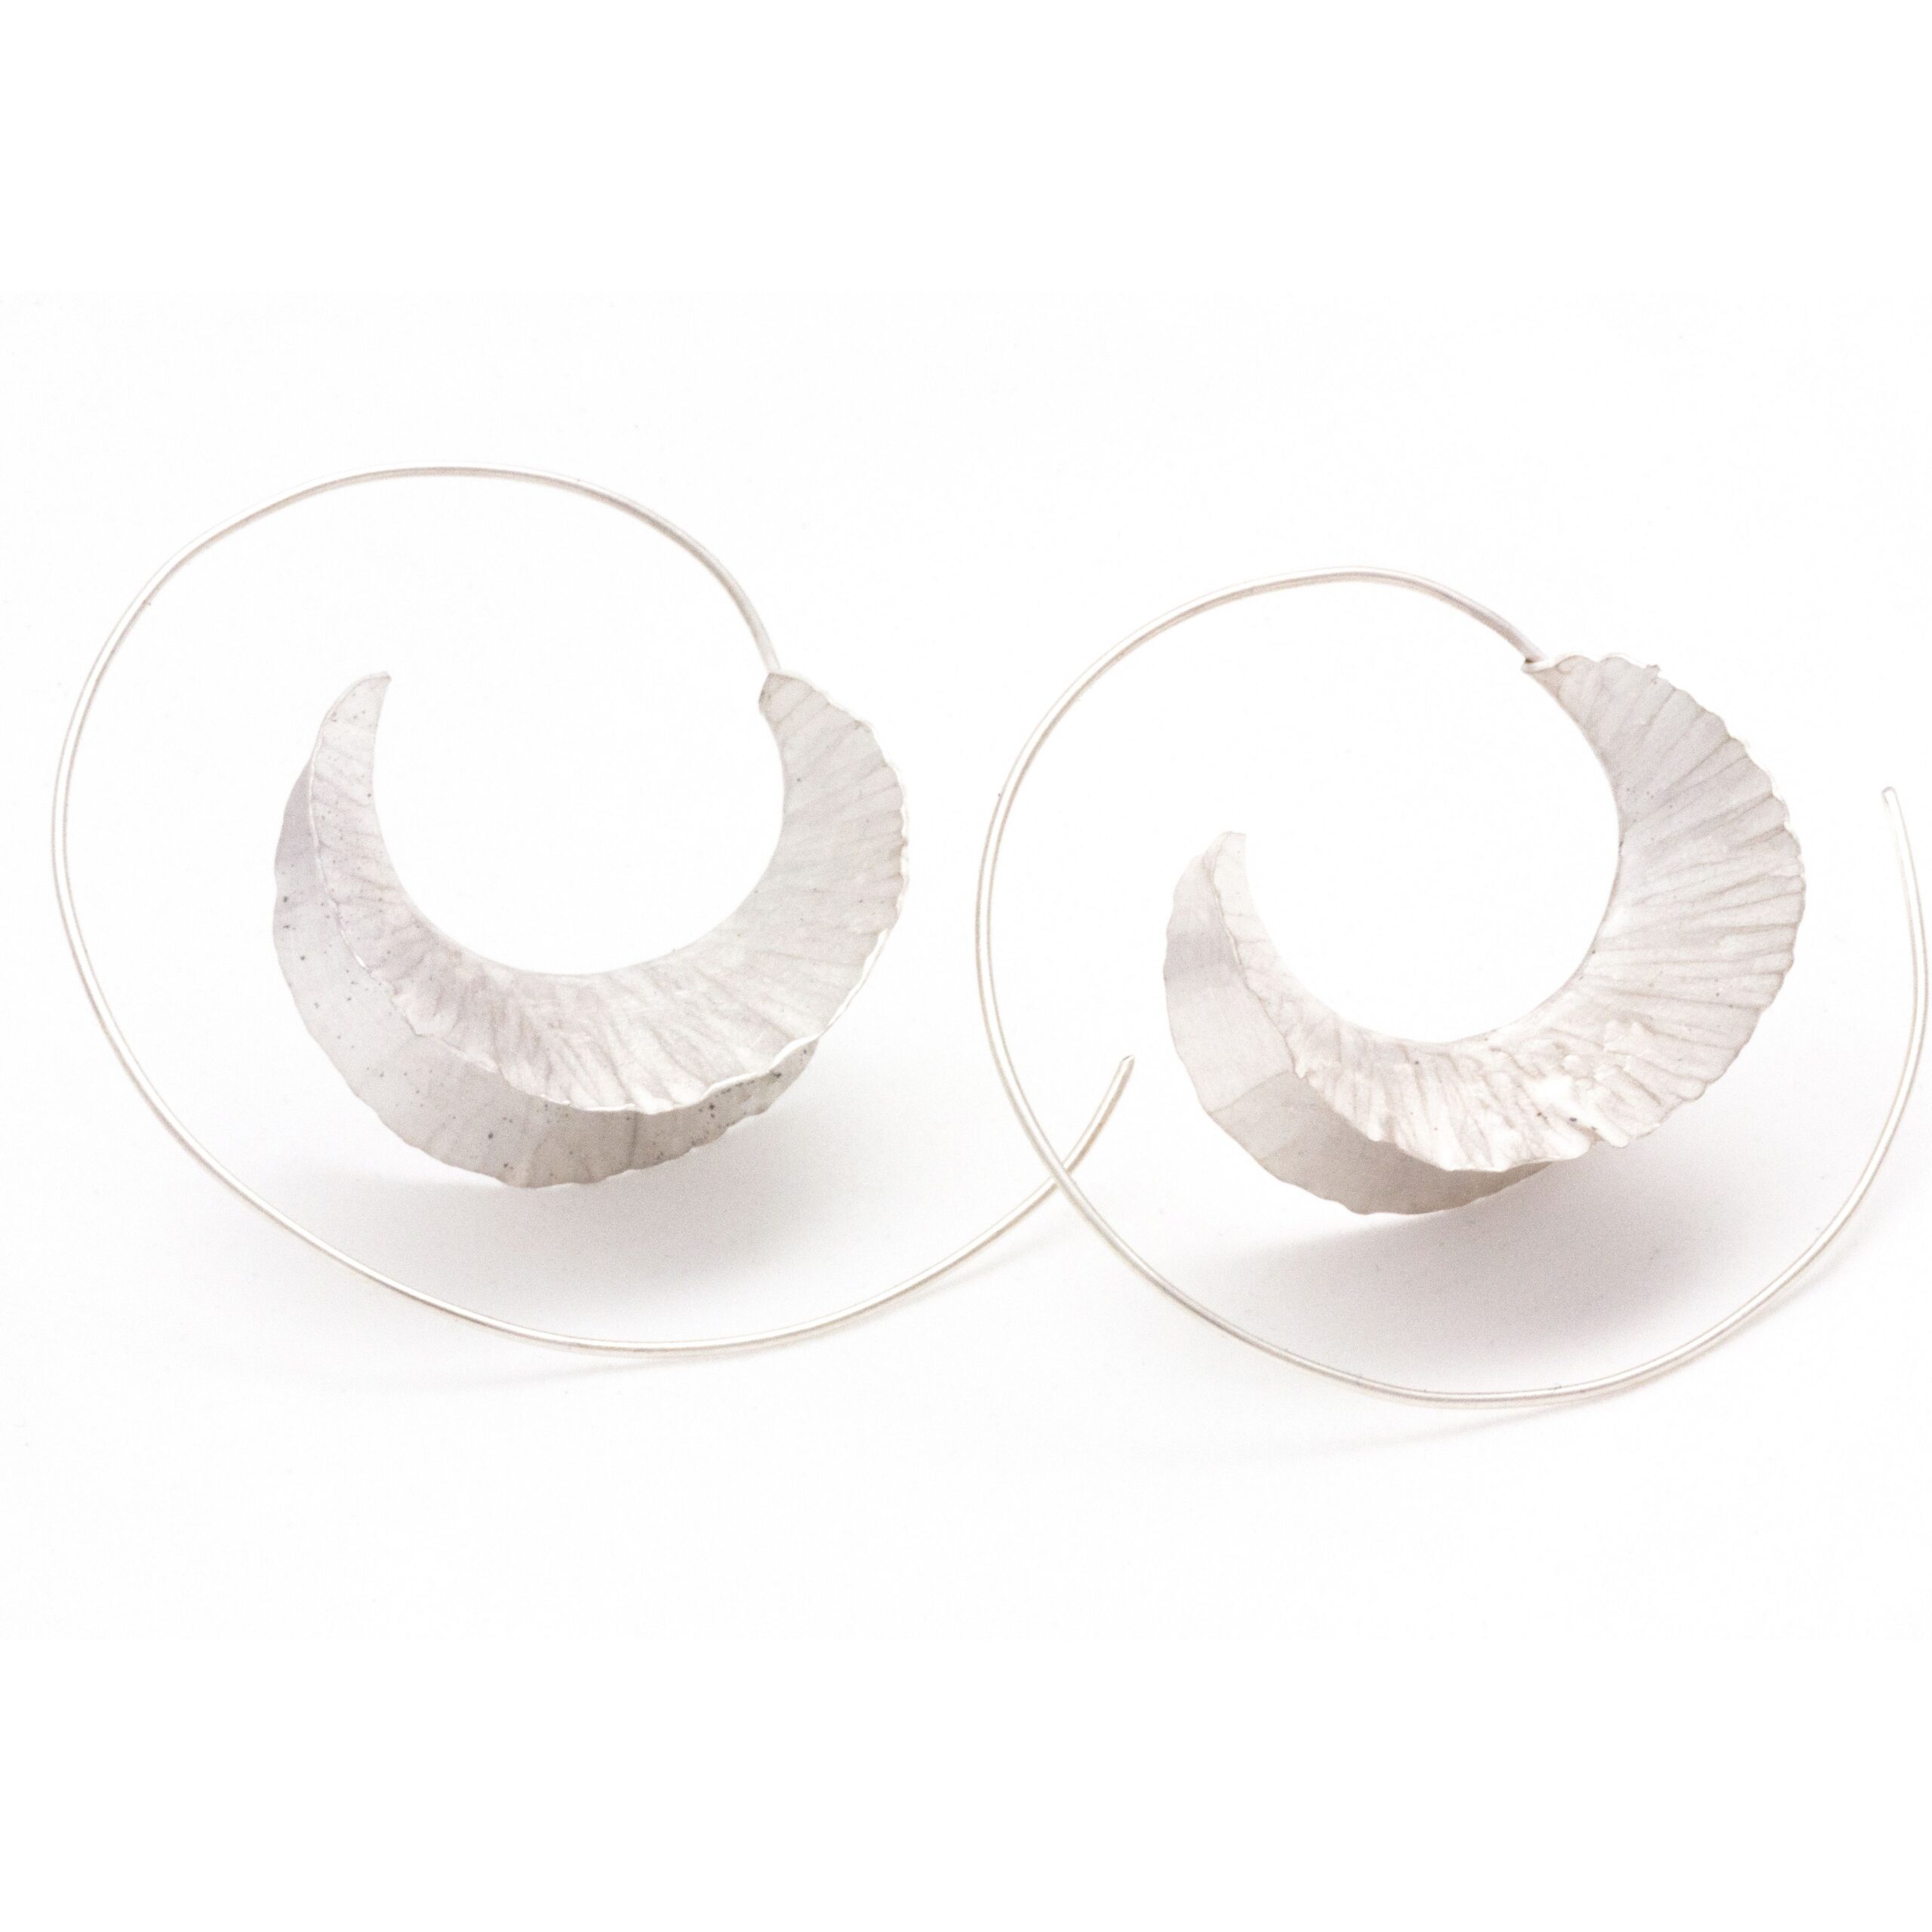 Claudine Moncion: Forge Large Earrings Silver Product Image 1 of 1